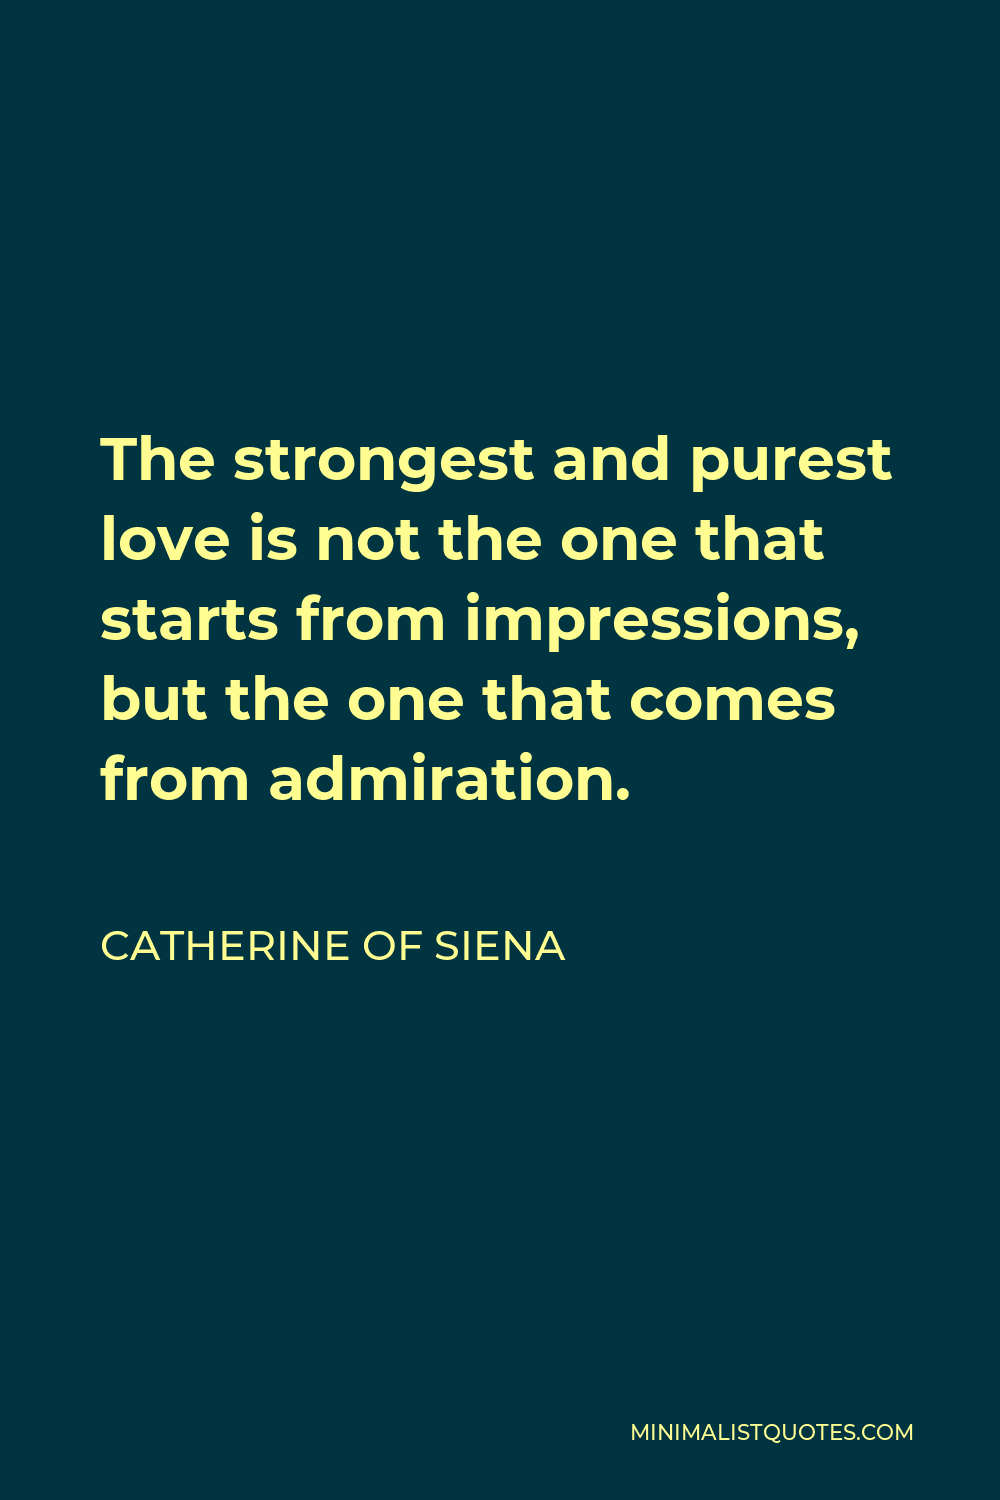 Catherine of Siena Quote - The strongest and purest love is not the one that starts from impressions, but the one that comes from admiration.